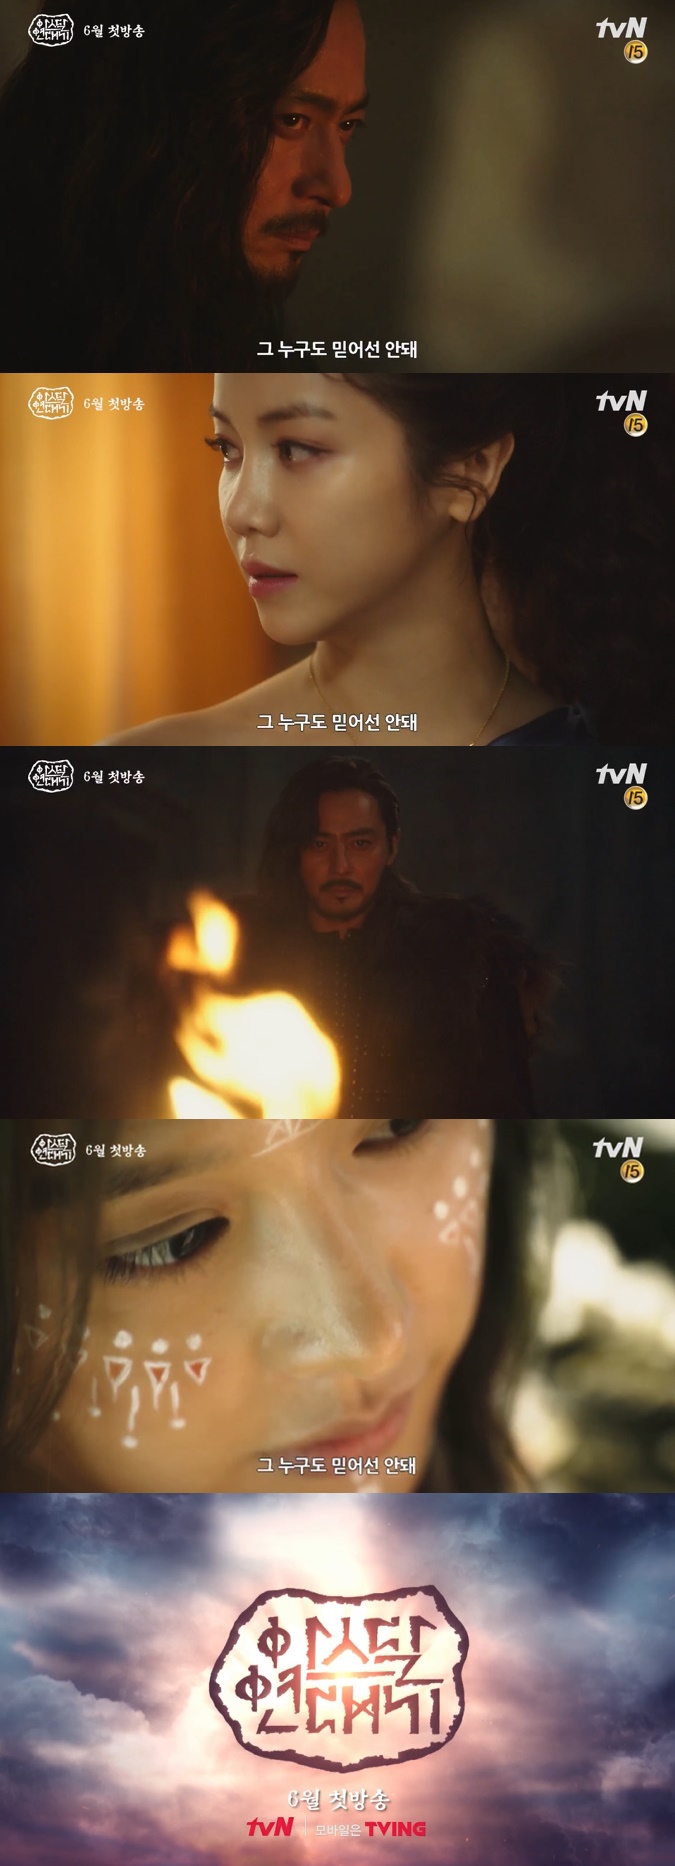 <p>No monthly chronicle, the first teaser video has revealed.</p><p>12 tvN new Saturday drama no pass Chronicles(a play Kim Young Hyun and Park Sang Yeon, Kim Suk) side is the first teaser video has revealed.</p><p>The revealed video is starring actor Jang Dong-gun, Song Joong-ki, Kim Ji-won, Kim Ok-bins appearance. Video on line and the background as often as for Jang Dong-guns look with often, and where,and asked that the scene starts with.</p><p>Also is Island the role of Song Joong-ki not deliveredand the chase to unfold a scene was painted. Along with this you have the role of Kim Ji-won, real to the role of Kim Ok-bin in this meaningful glances with.</p><p>Heres the beginning of everything in this place living legend.is the phrase, life in the filled with desire and those who believe in nofor questions, I found myself.</p><p>No monthly chronologyof the civilization and the country dealt with the story of ancient human history fantasy drama. Microbes signal my unclerendering for Kim Seok PD and deep-rooted tree Selena Gomez and is drawn to Kim Hyun writer of the battle.</p><p>Especially Jang Dong-gun, Song Joong-ki, Kim Ji-won, Kim Ok-bin such a brilliant cast and one half of the mythical story and the first try our attention.</p><p>No monthly Chroniclesis the confession after 6 March will be broadcast.</p>